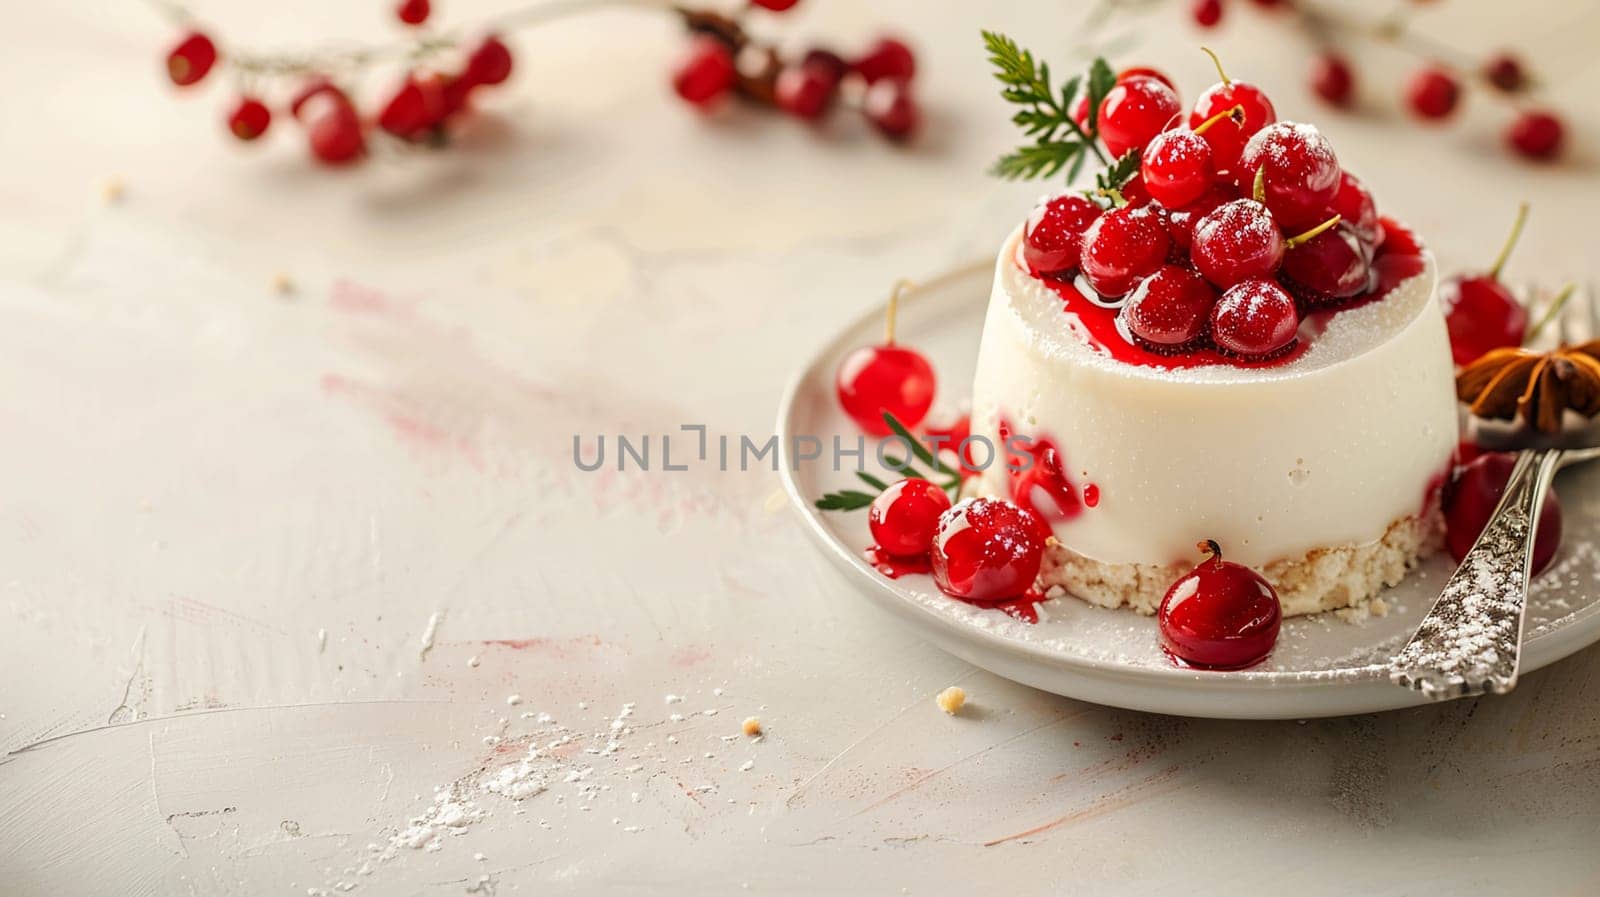 Delicious white dessert garnished with juicy red cherries, presented on elegant light background, ideal for celebrating special moments